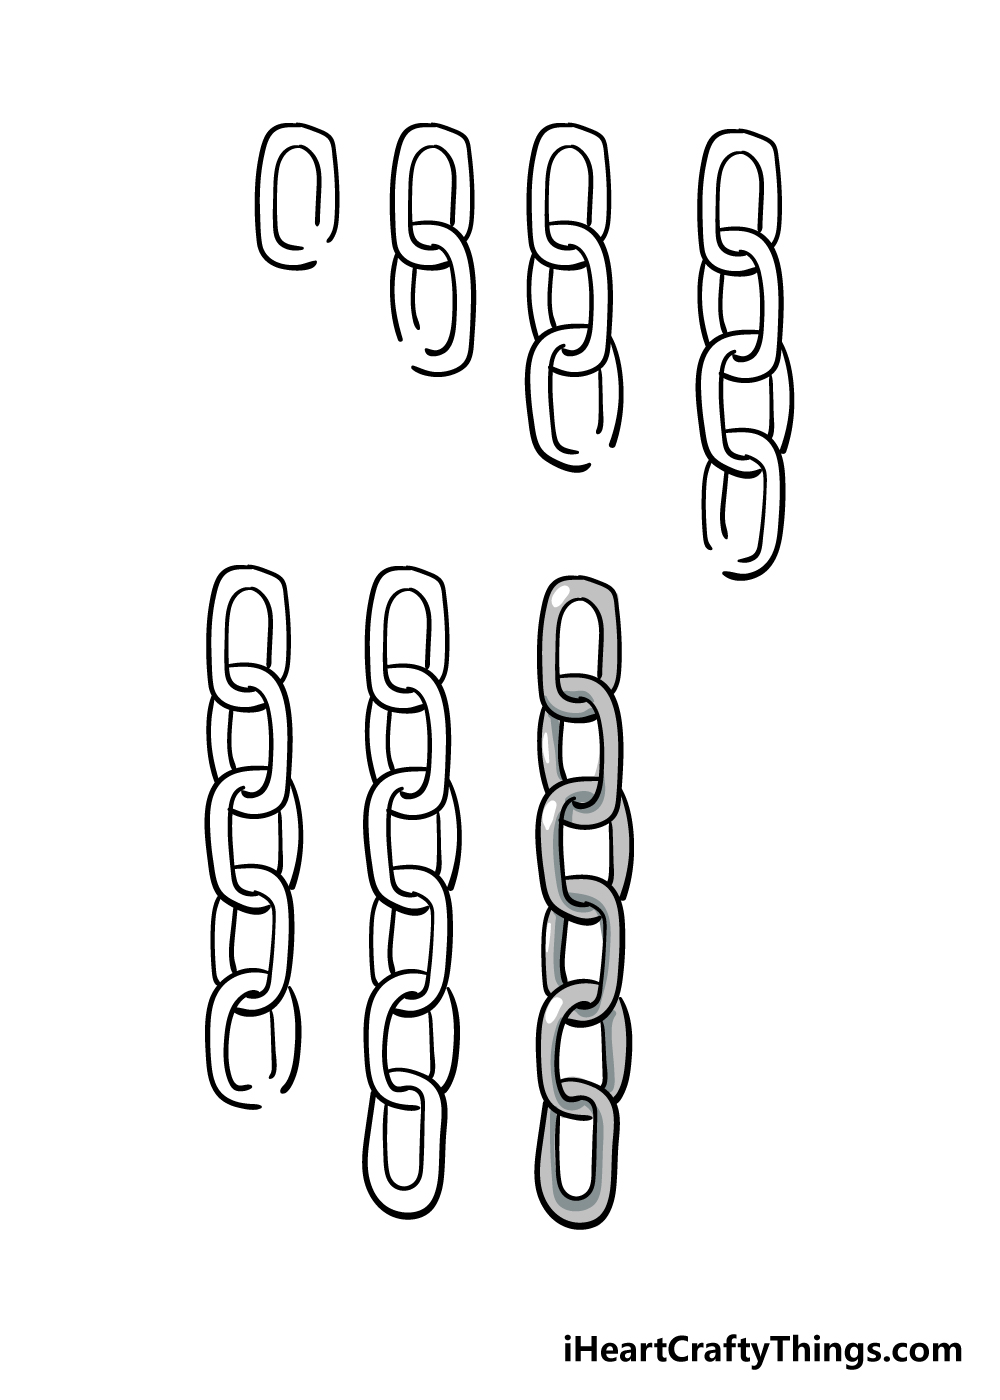 how to draw chains in 7 steps